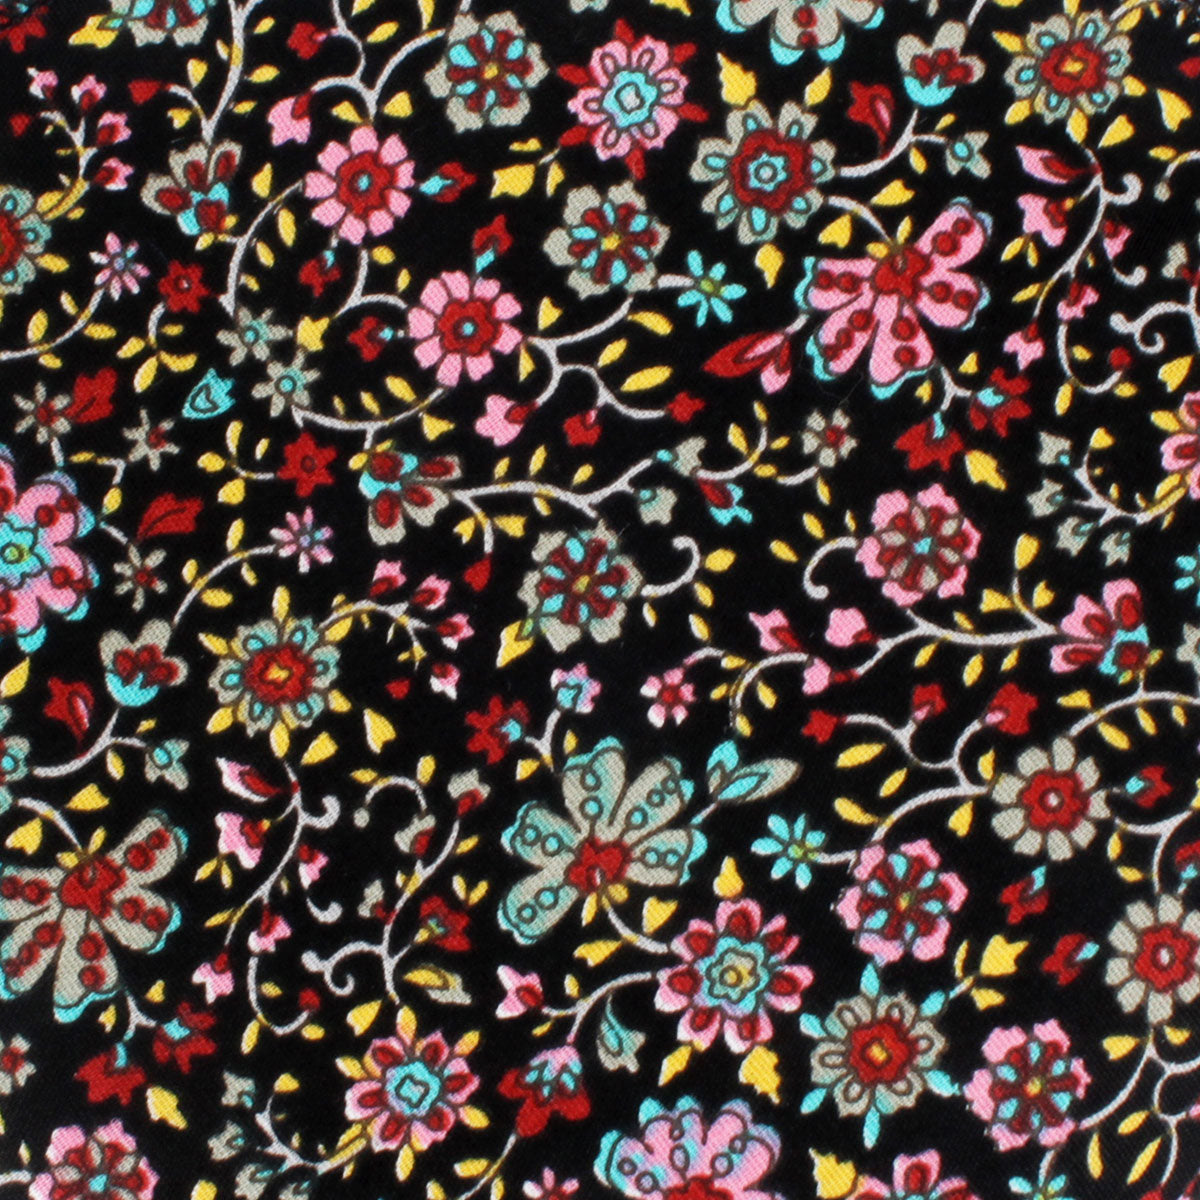 Istanbul Floral Pocket Square Fabric